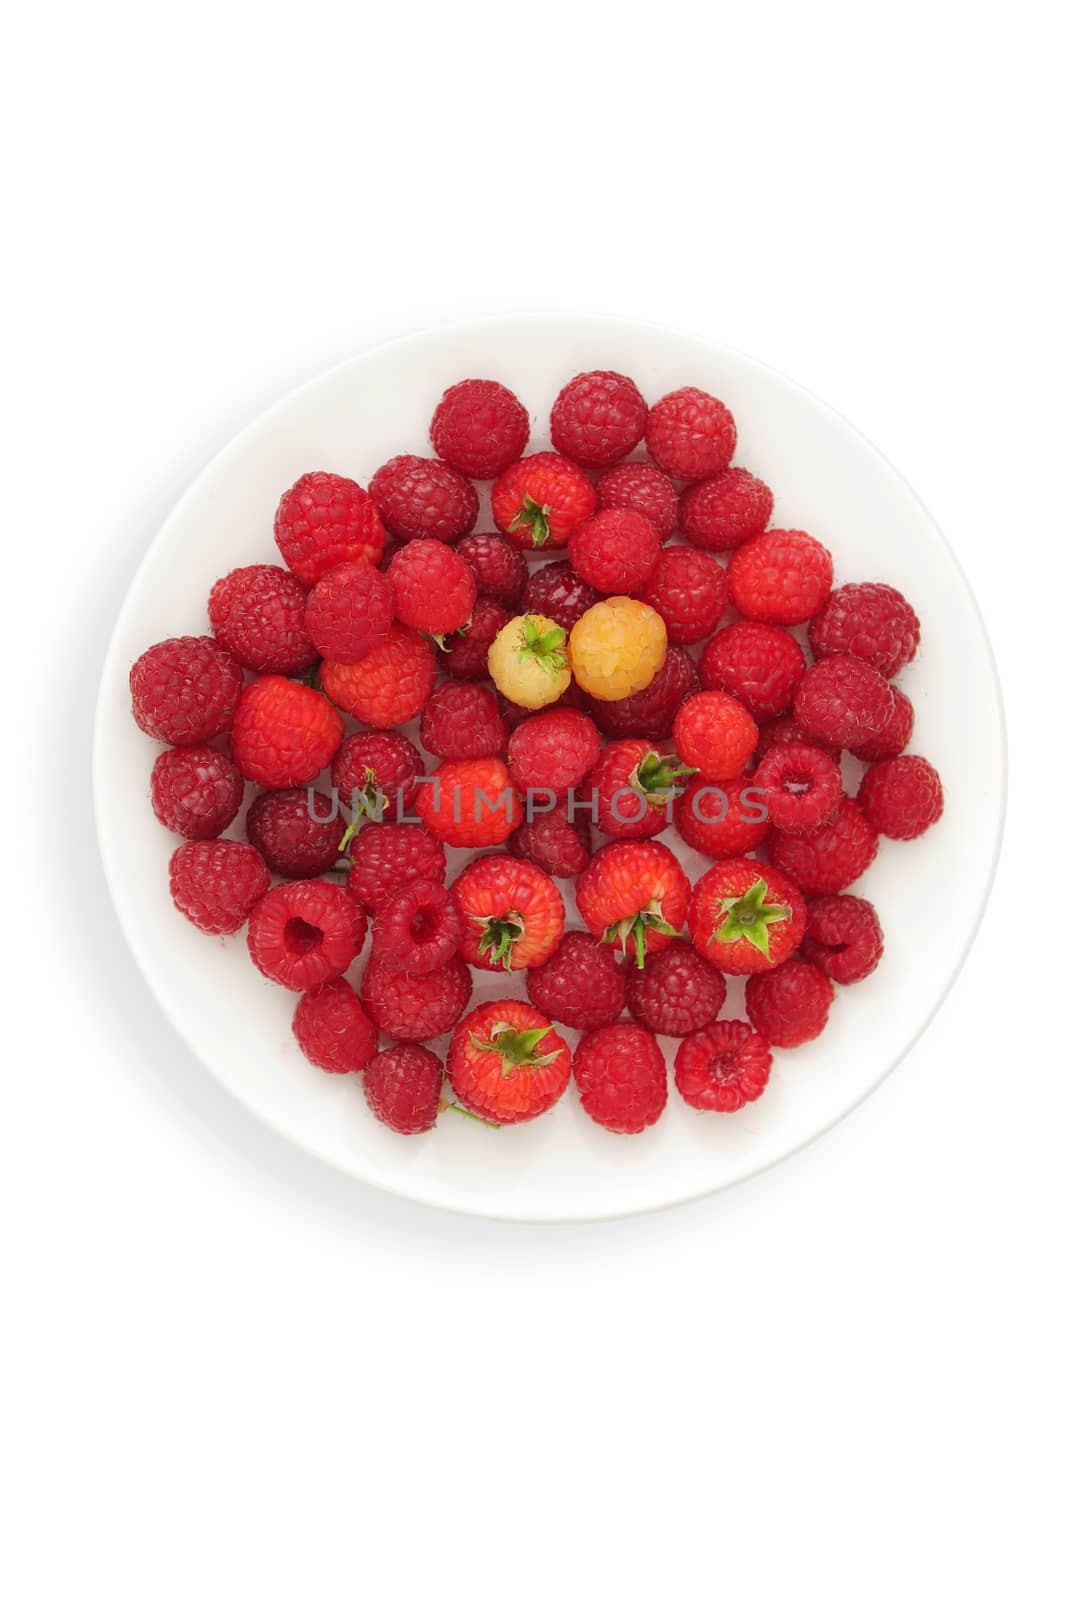 Ripe berries of a raspberry on a plate - white background by cococinema